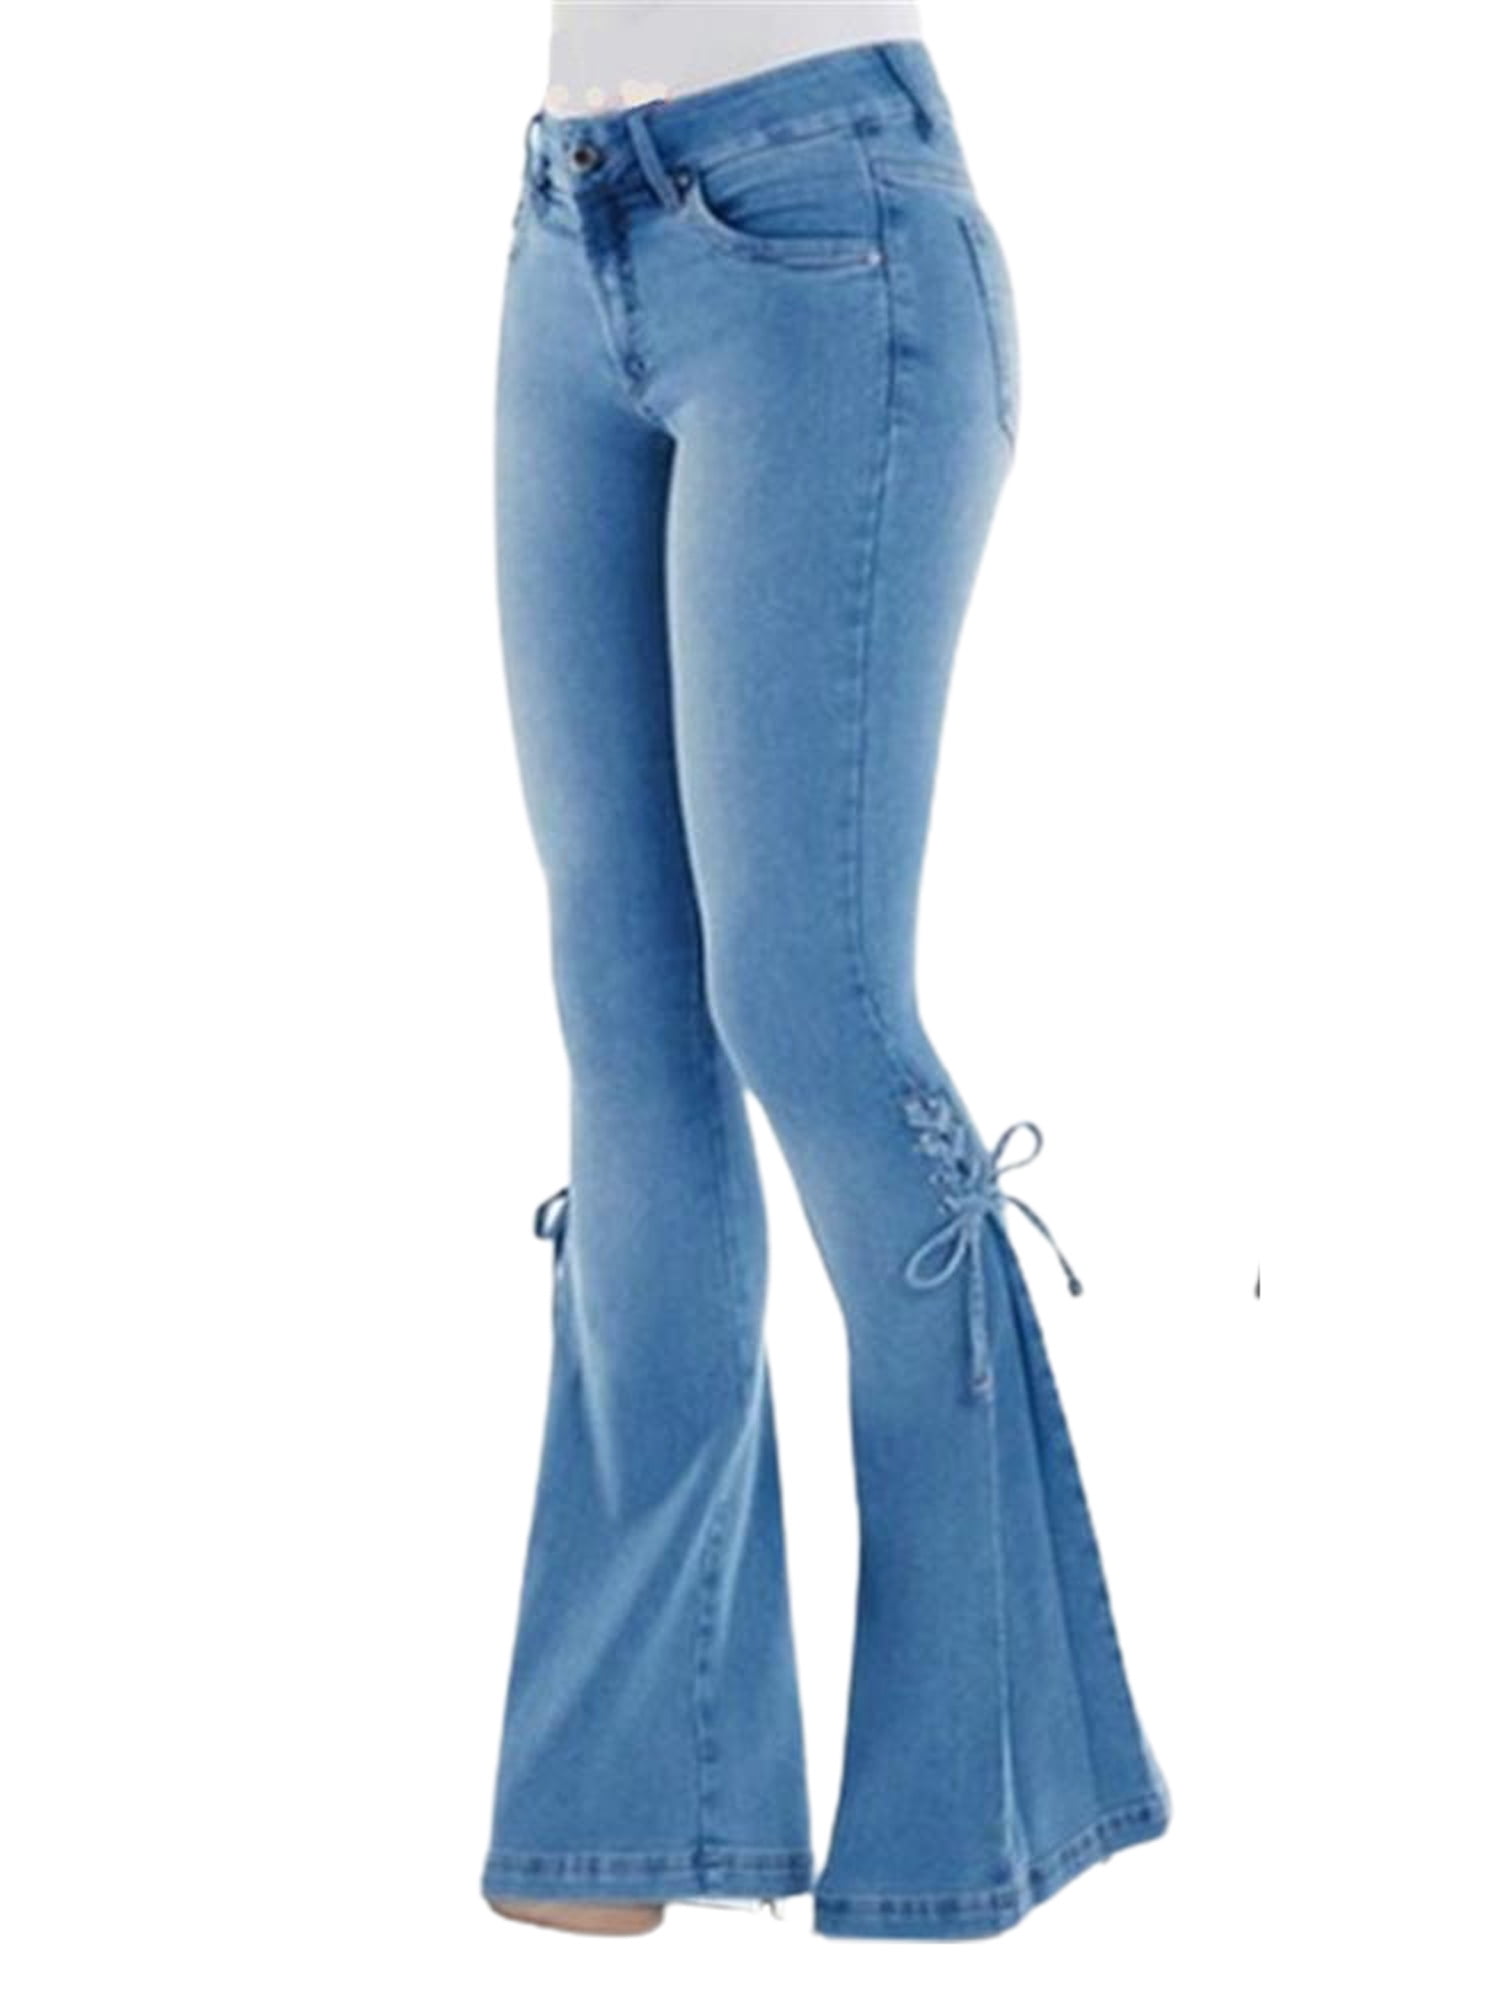 Womens Bootcut Denim Jeans Stretch Mid Rise Flared Long Pants Trousers Size 6-30